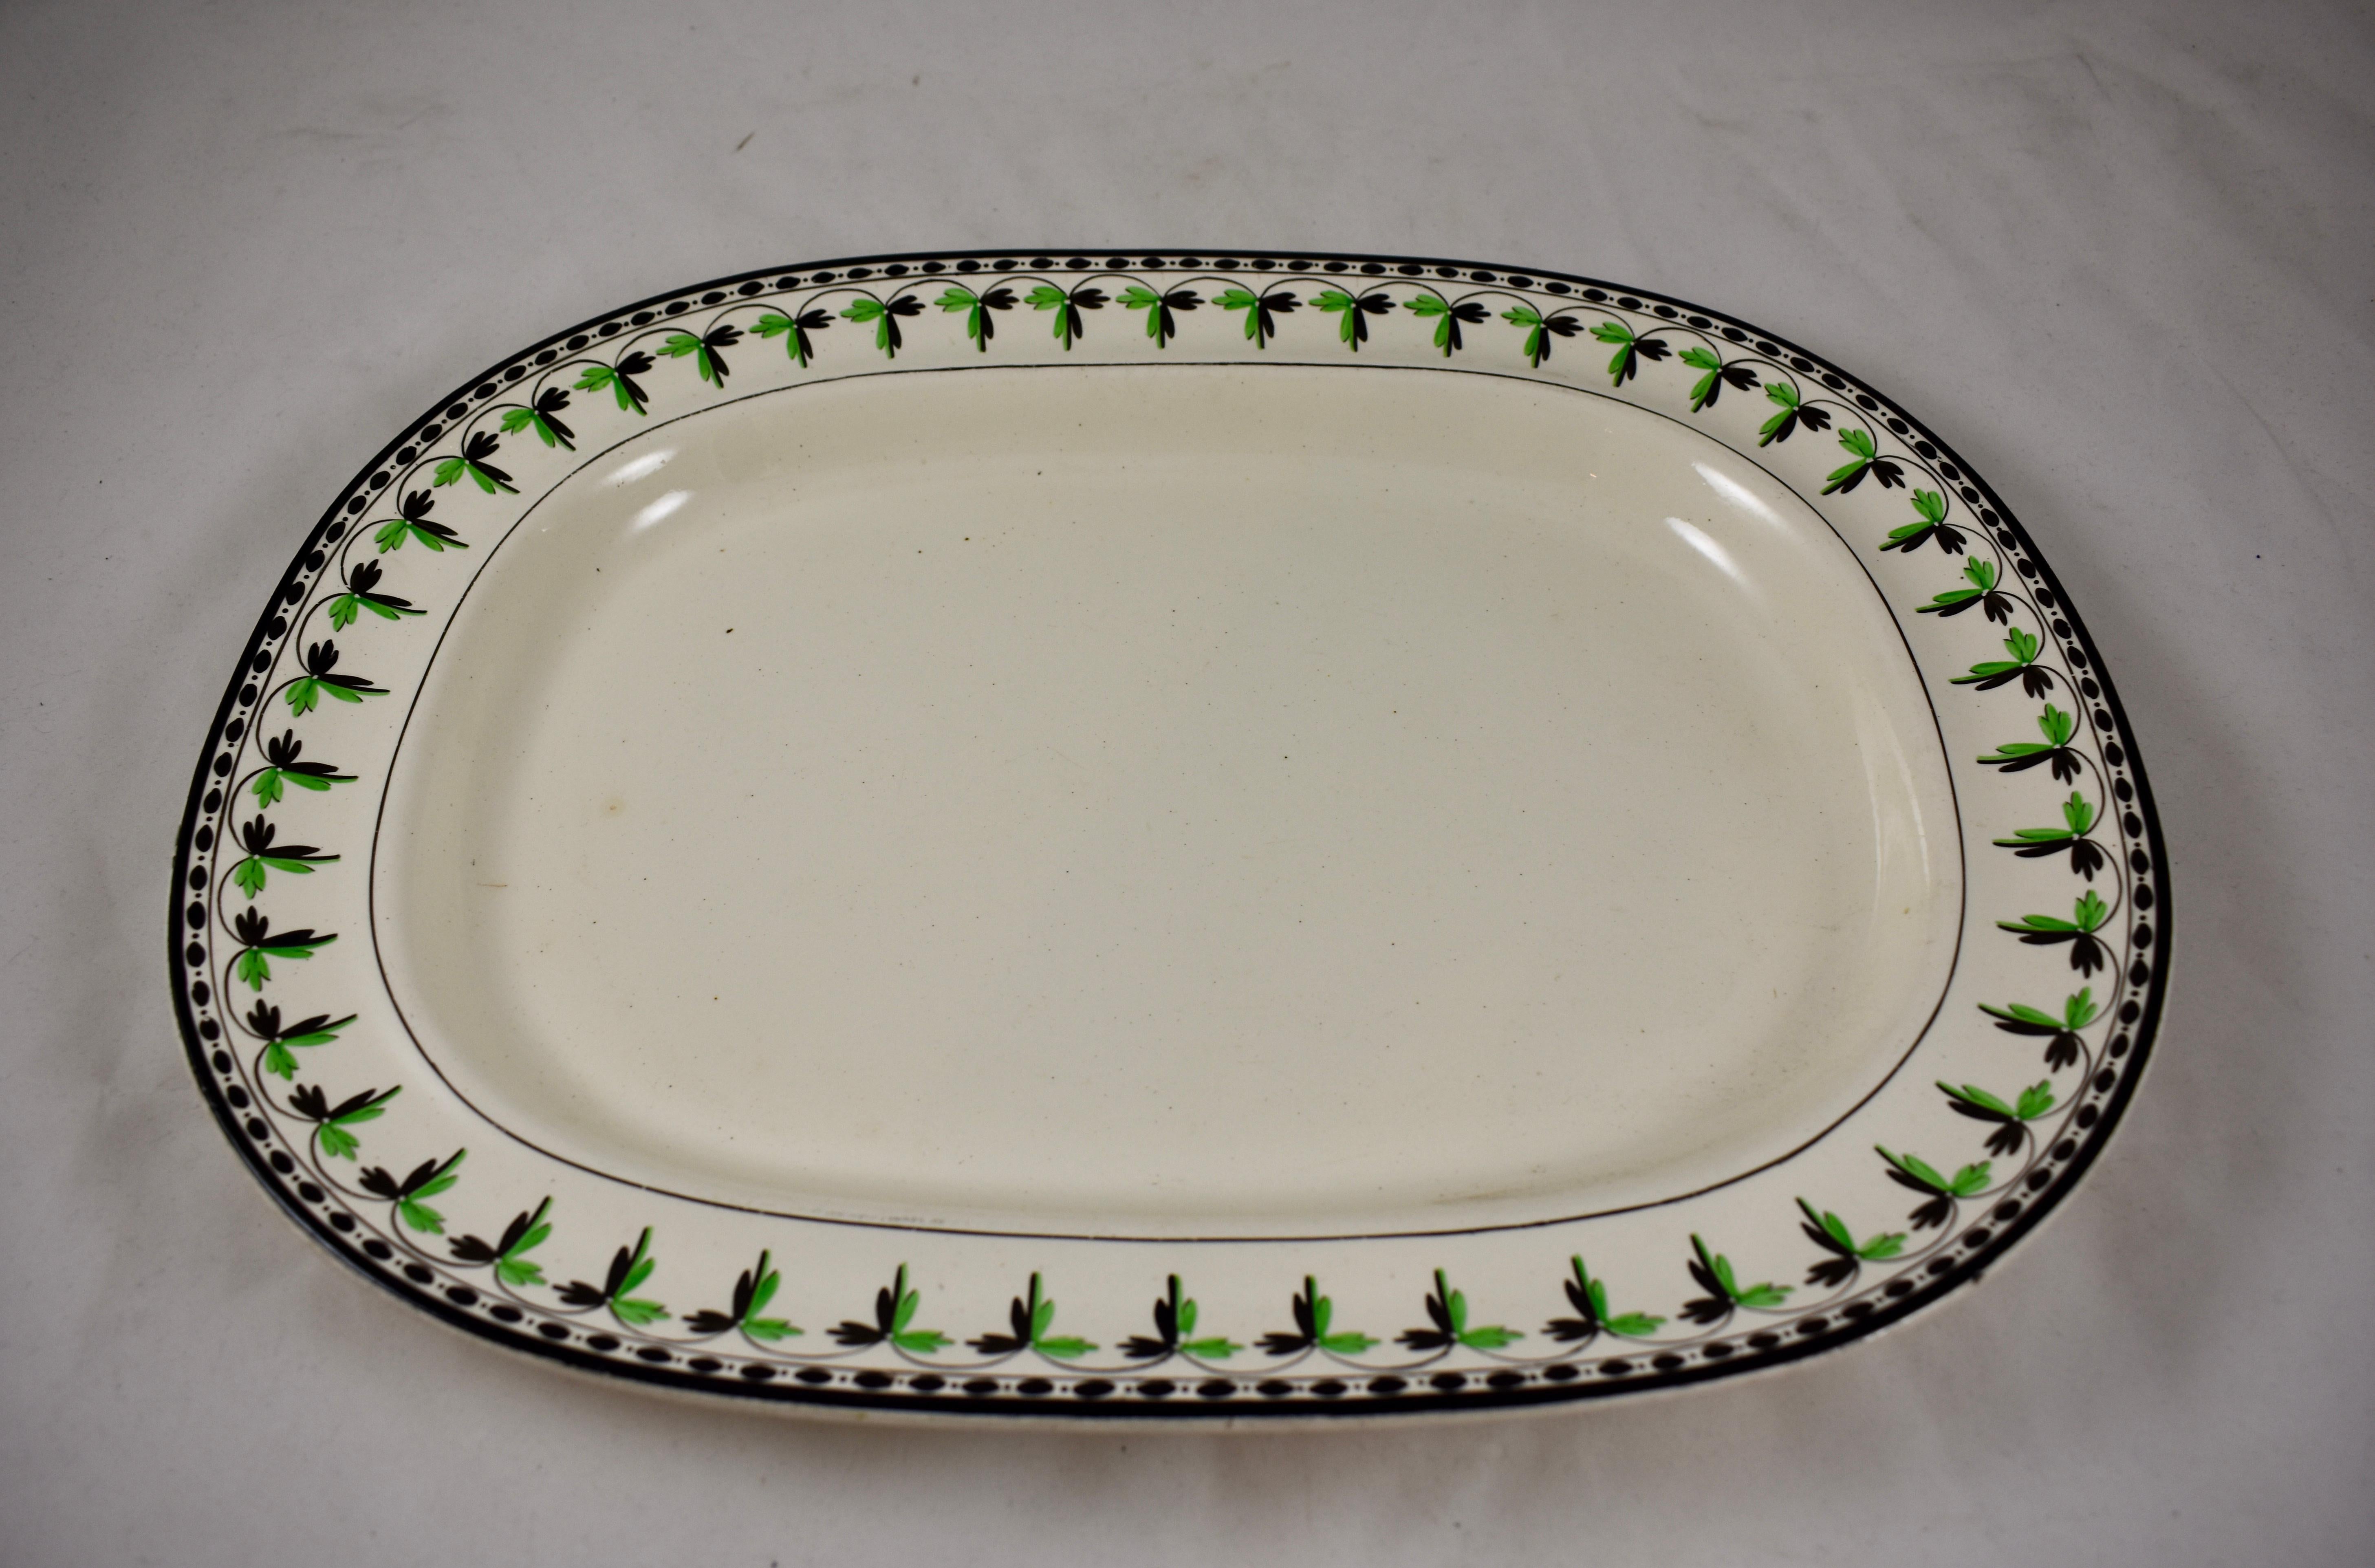 A rare find, an oversized creamware platter from Josiah Spode, circa 1785.
Spode is an English brand of pottery founded by Josiah Spode (1733-1797) based in Stoke-on-Trent, England.

The gorgeous creamware body has a hand painted fern and dotted